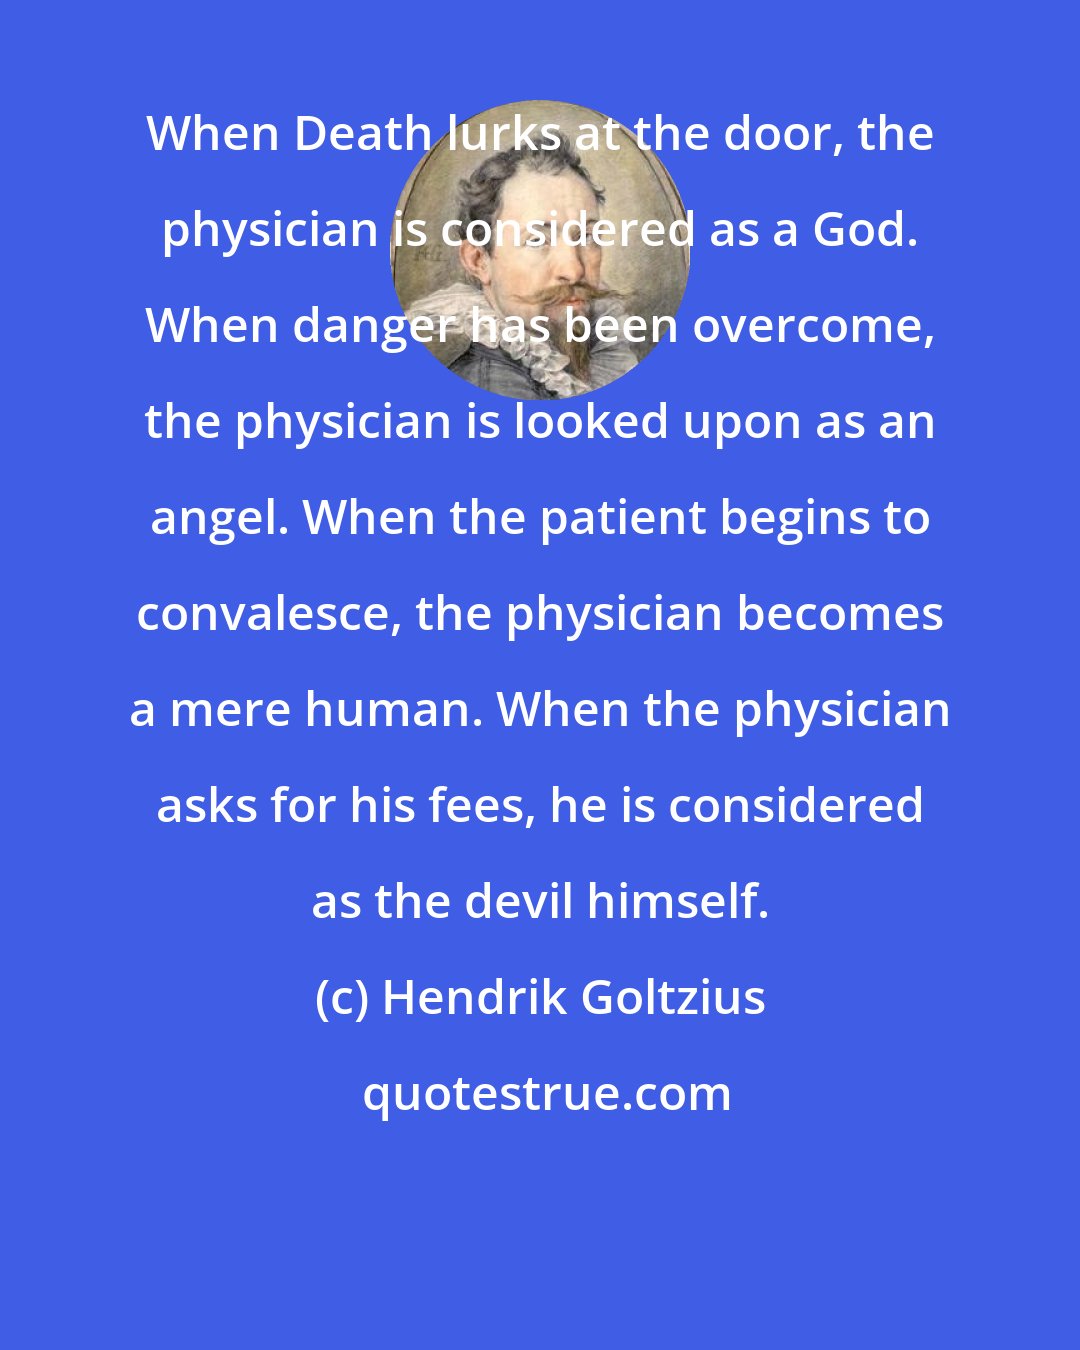 Hendrik Goltzius: When Death lurks at the door, the physician is considered as a God. When danger has been overcome, the physician is looked upon as an angel. When the patient begins to convalesce, the physician becomes a mere human. When the physician asks for his fees, he is considered as the devil himself.